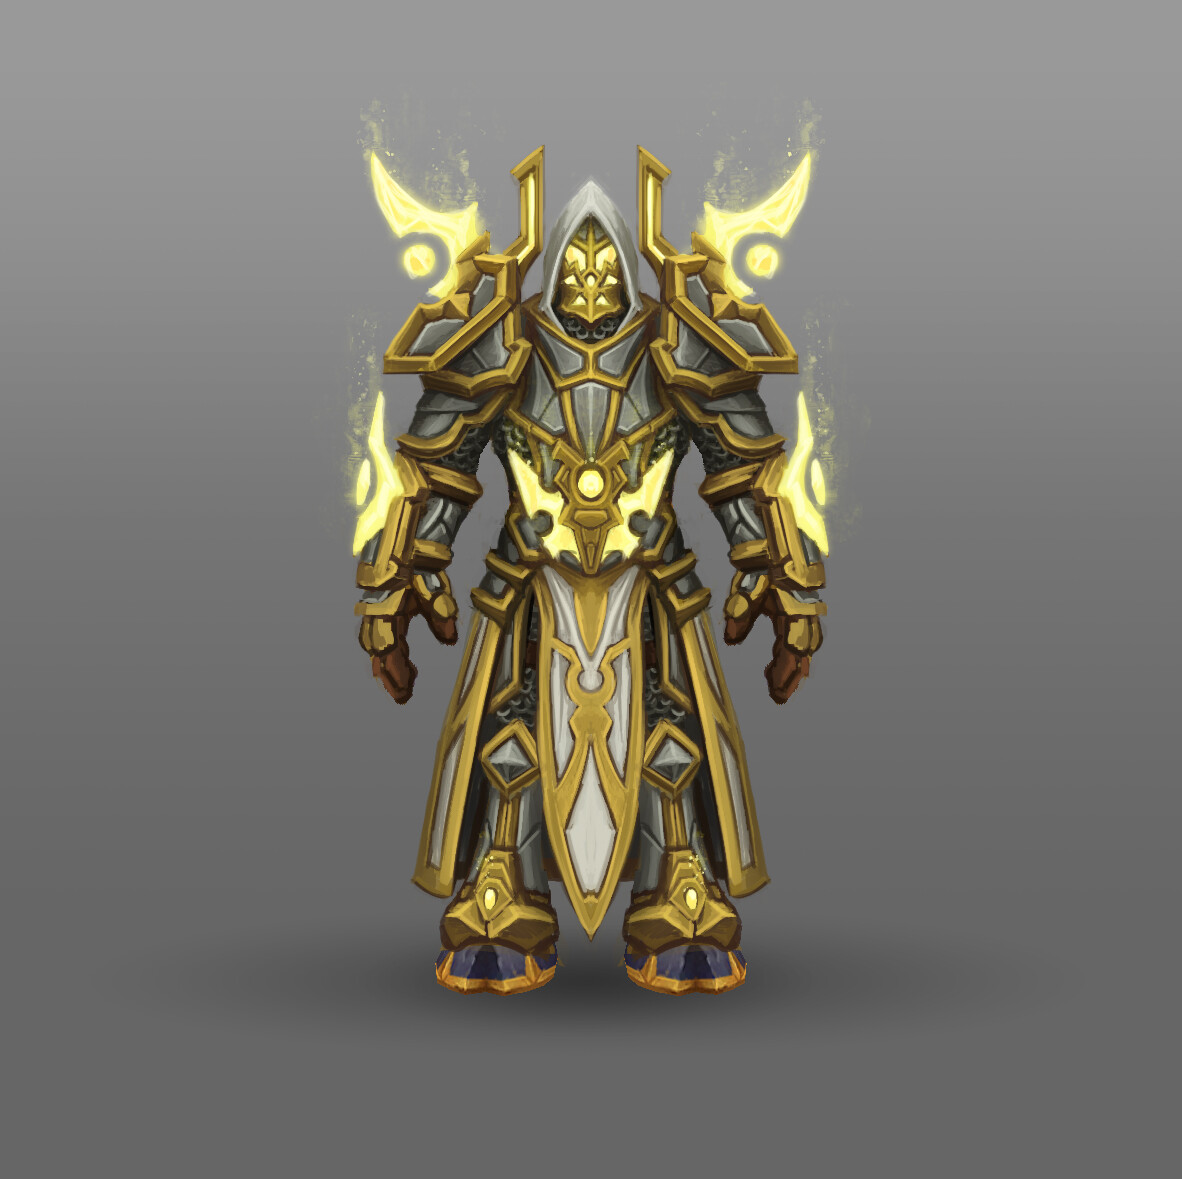 Paladin
For the Lightforged Paladin I wanted to make a set inspired by the WoW Judgement set, but mixed with Draenei/Naruu design elements.